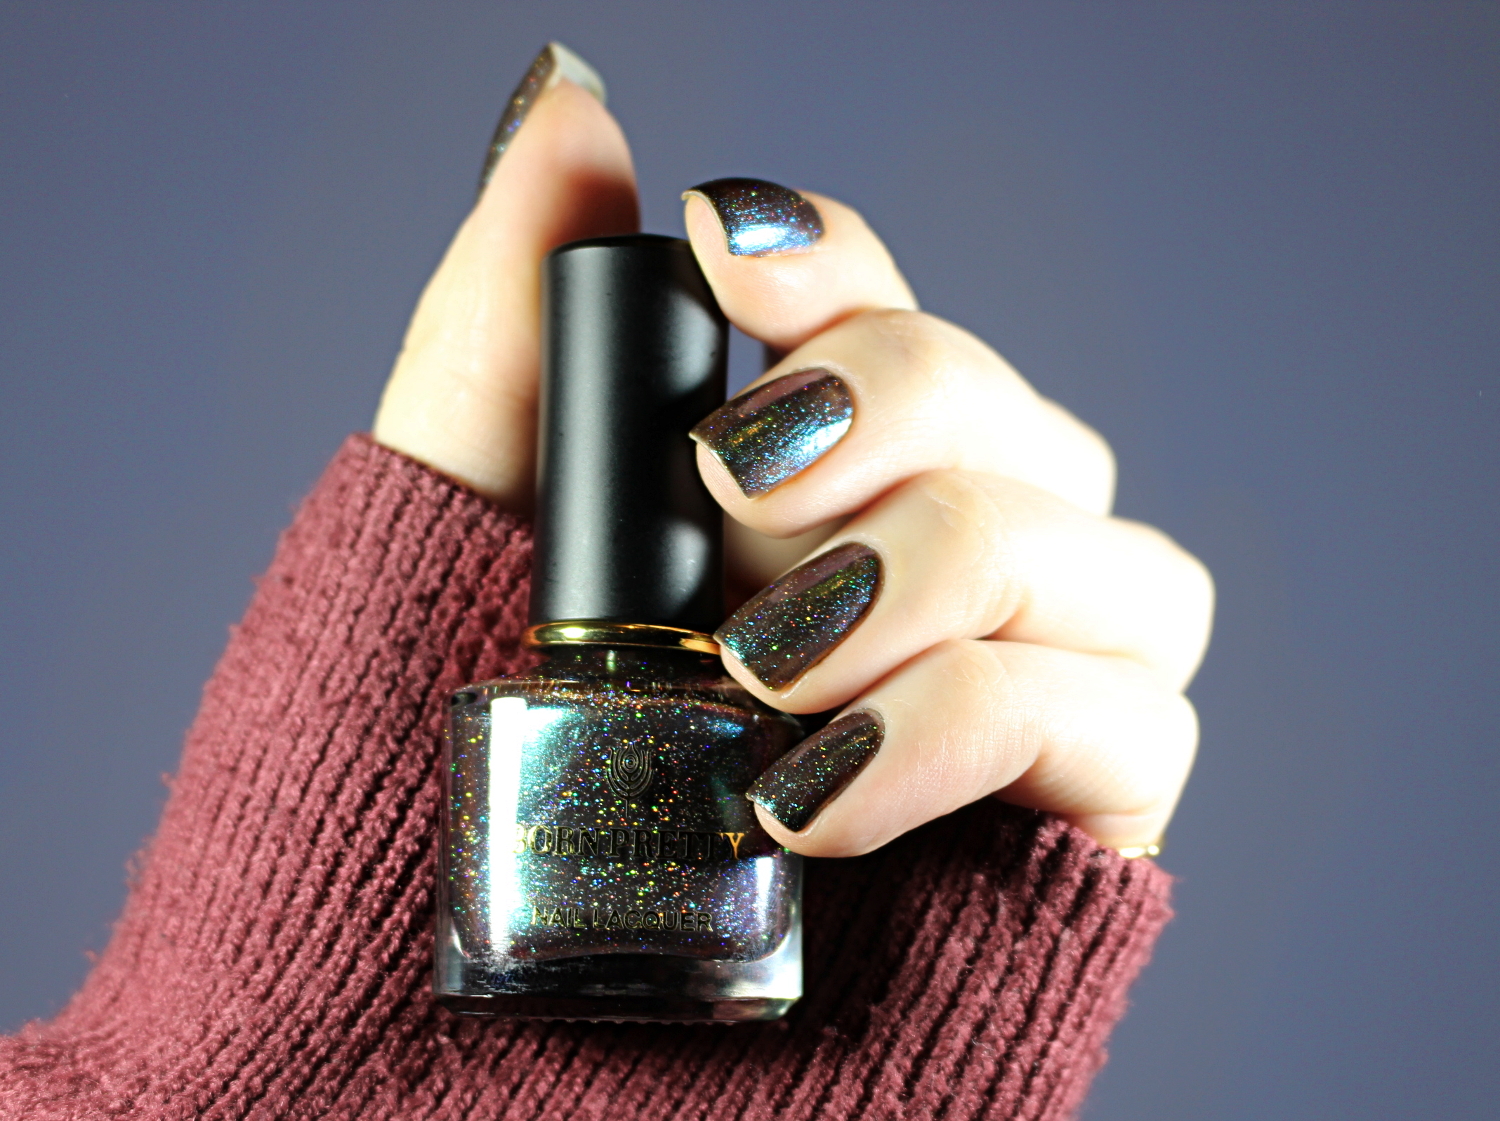 a close-up of a green holographic nail polish bottle by born pretty